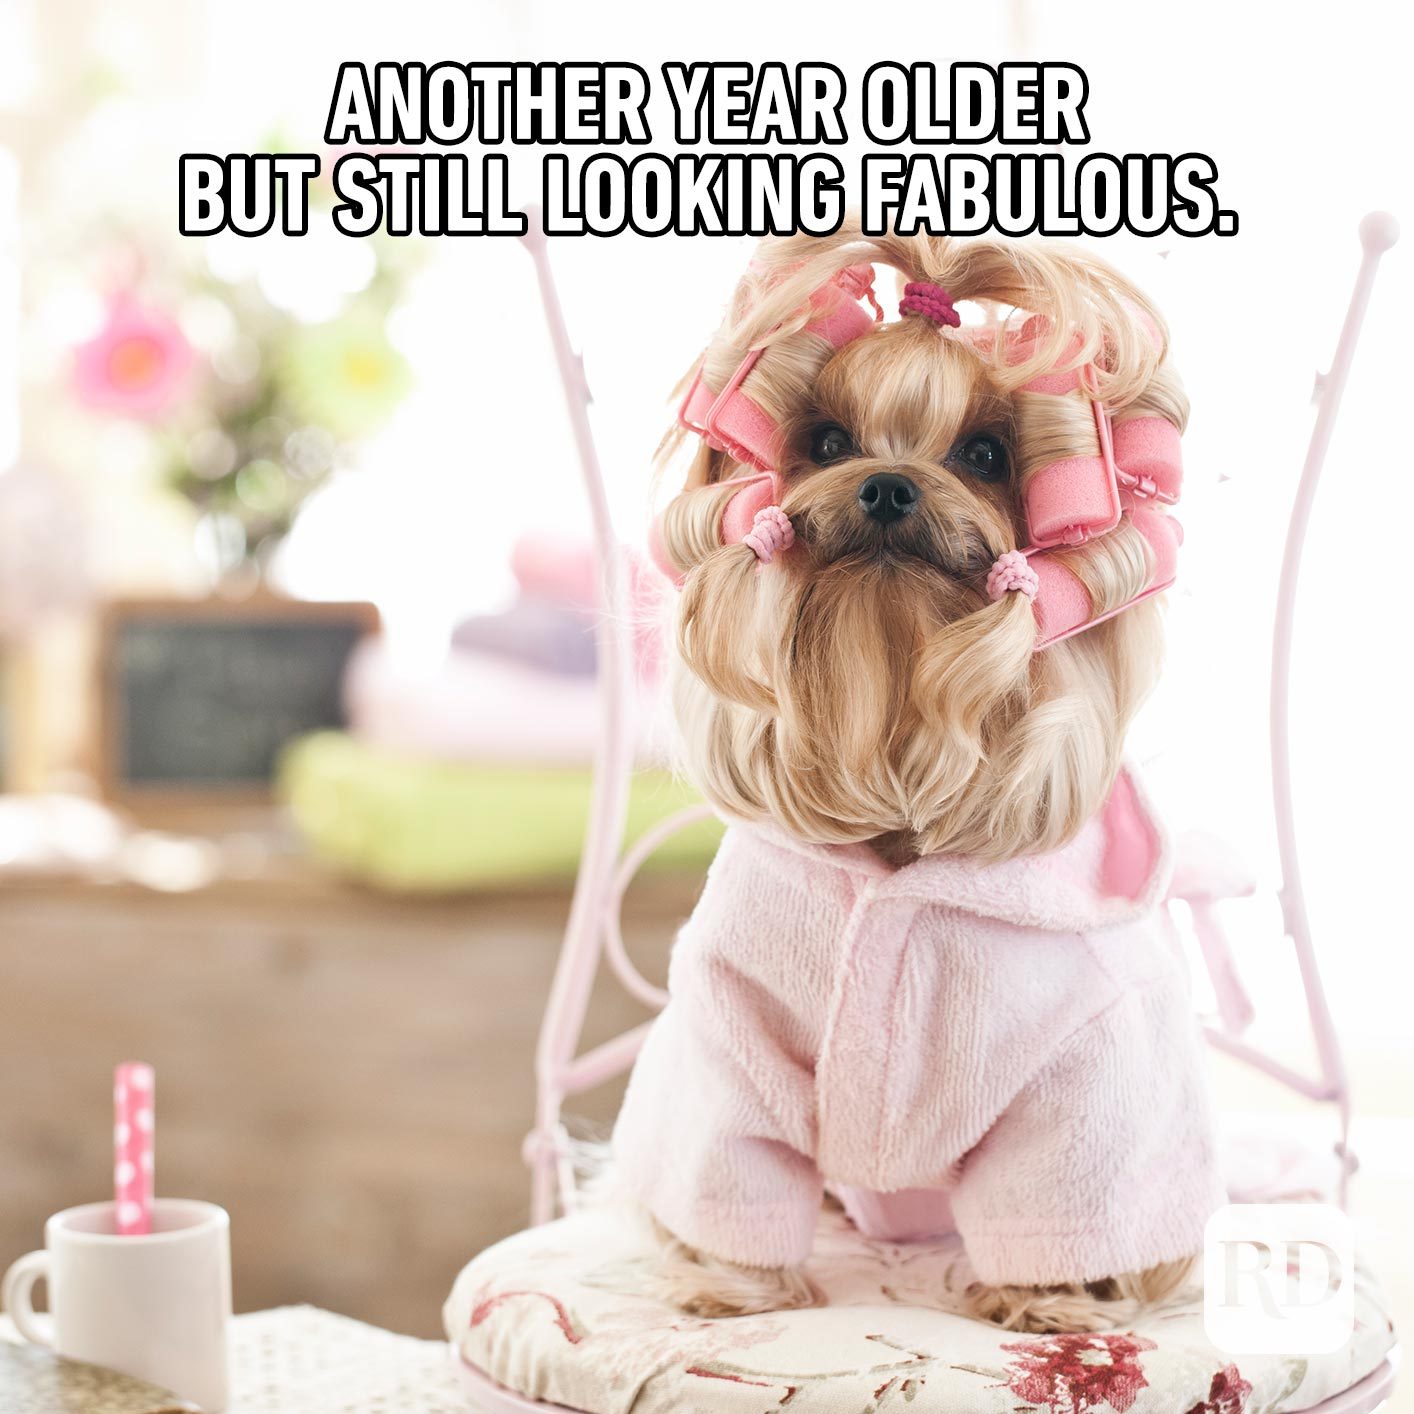 30 of the Funniest Happy Birthday Memes Reader's Digest